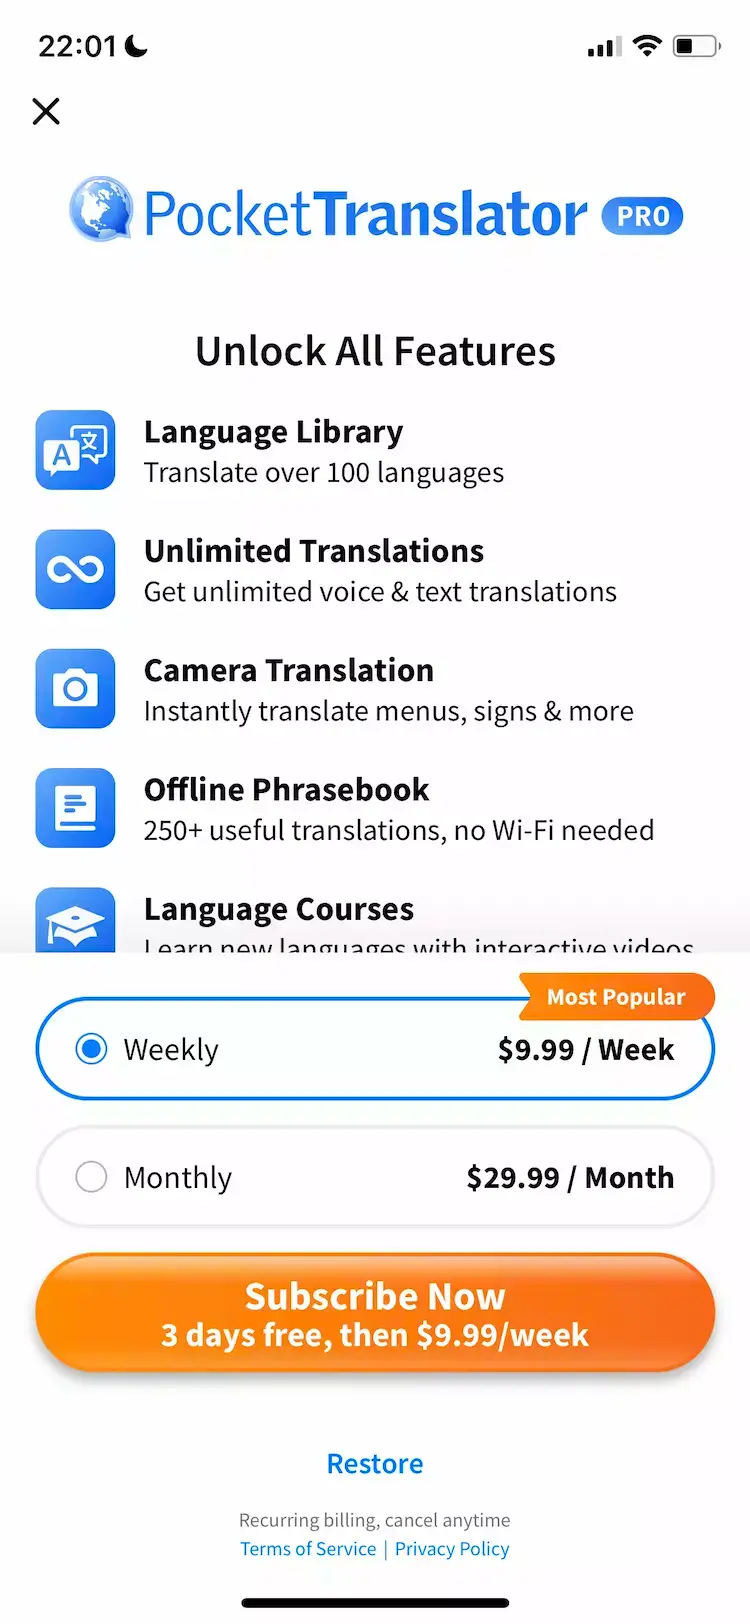 A mobile paywall design example by Translate - Pocket Translator from the Utilities category